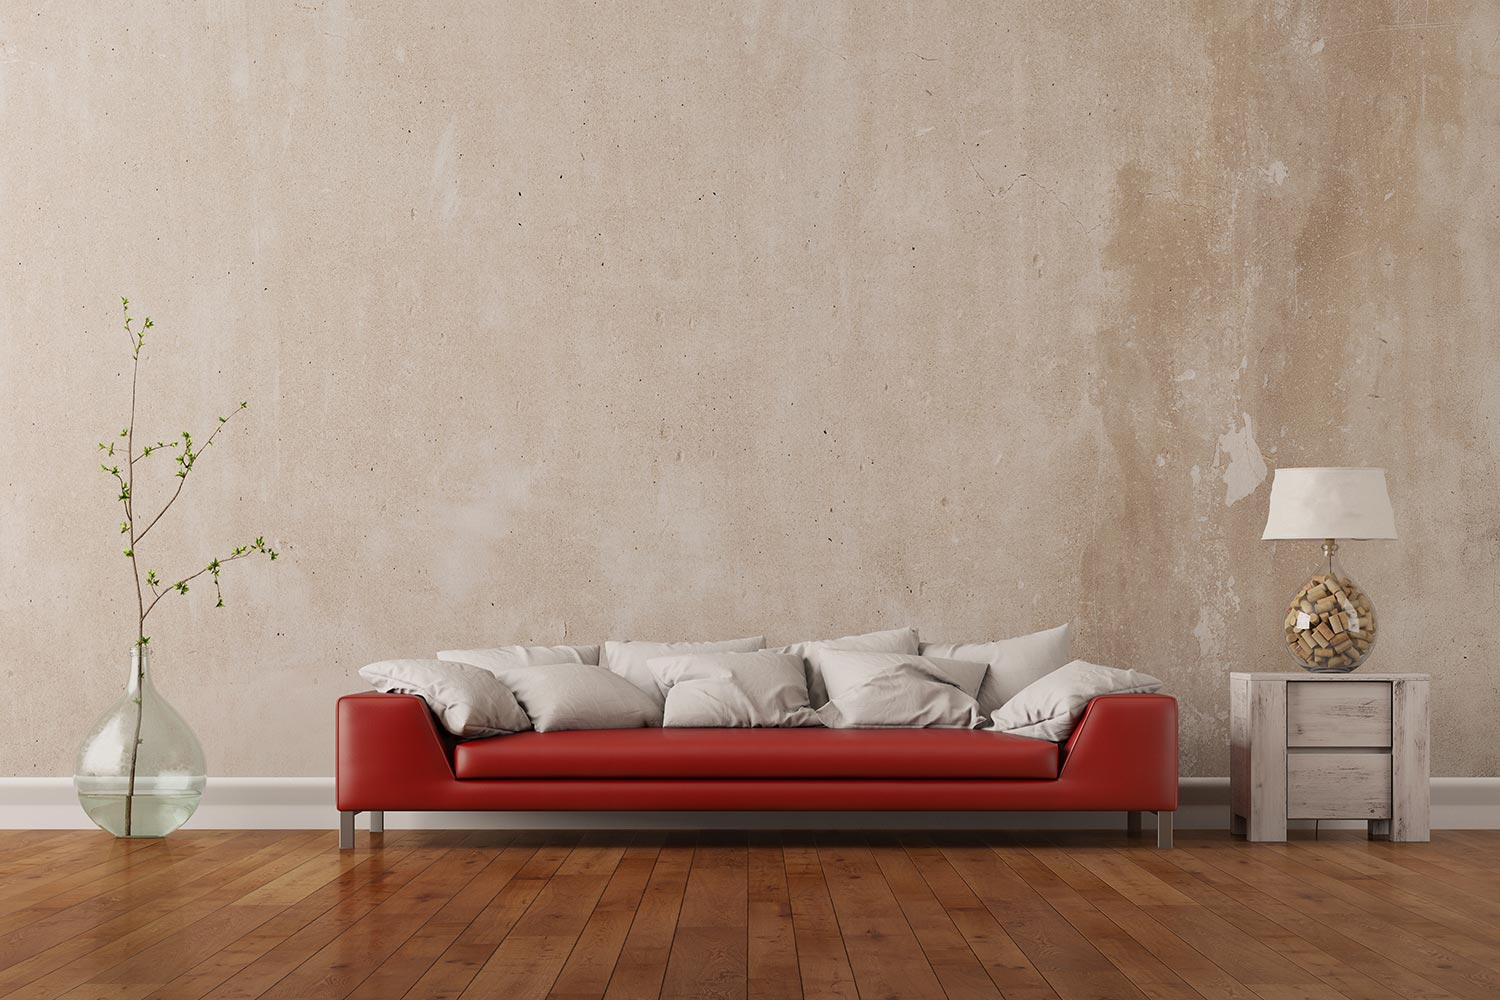 Red sofa standing in living room in front of an empty wall